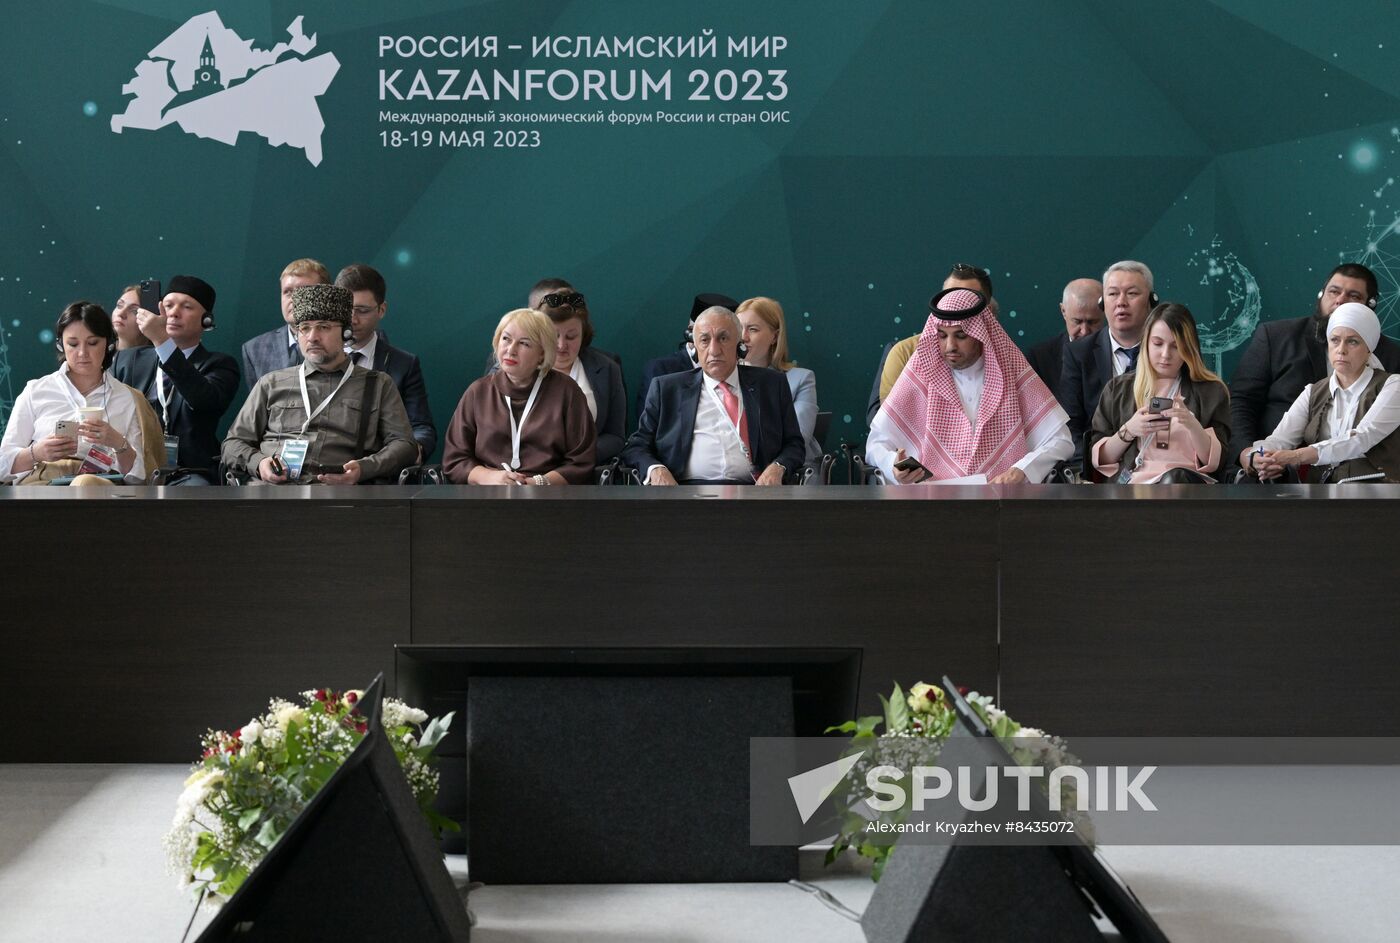 KAZANFORUM 2023. Prospects of accreditation of Halal certification agencies in Russia